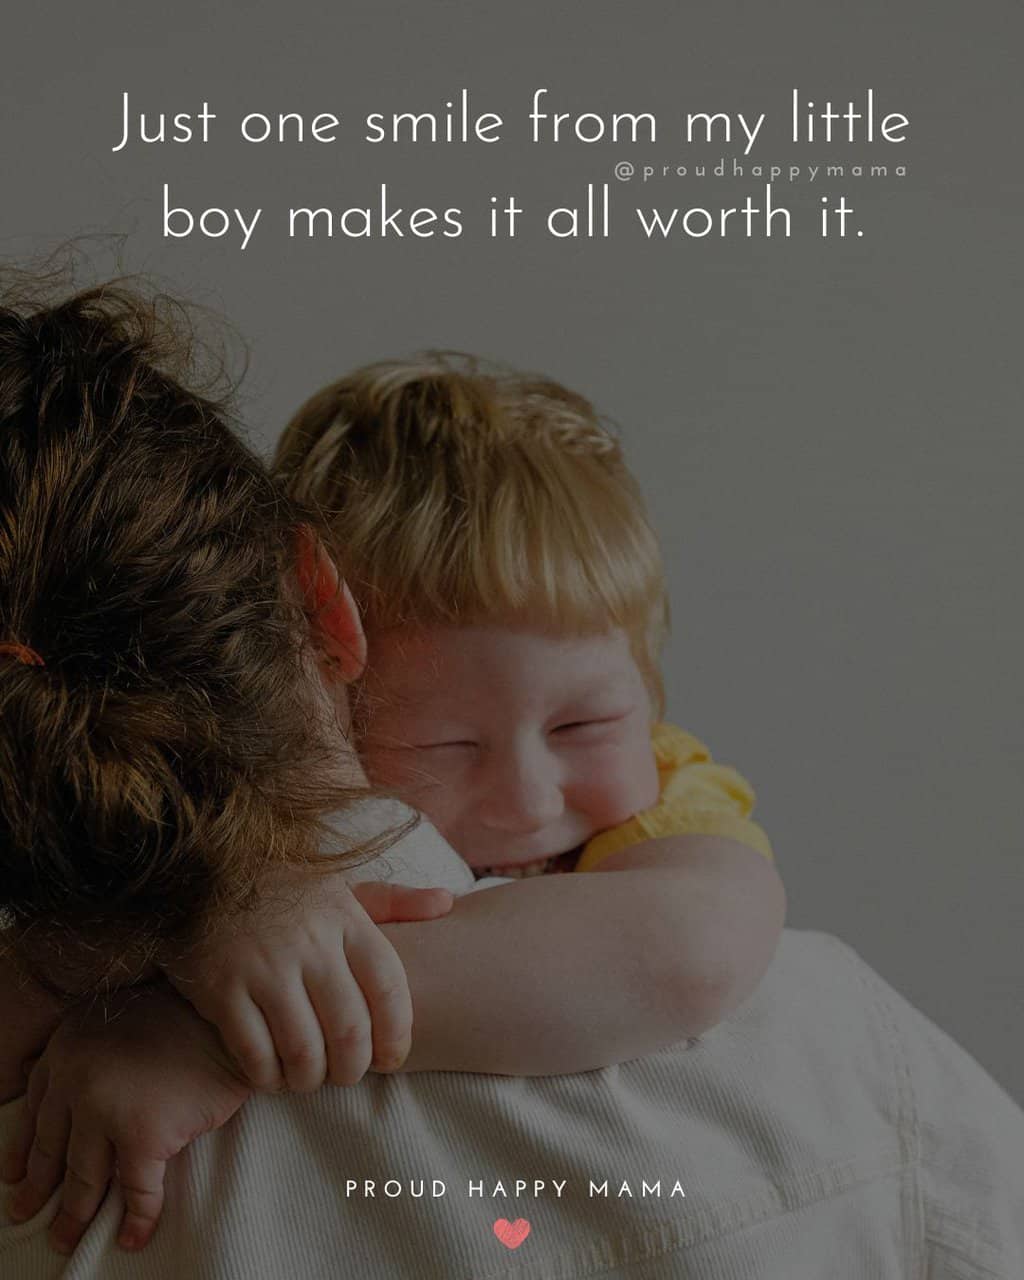 Quotes for little boys - Just one smile from my little boy makes it all worth it.